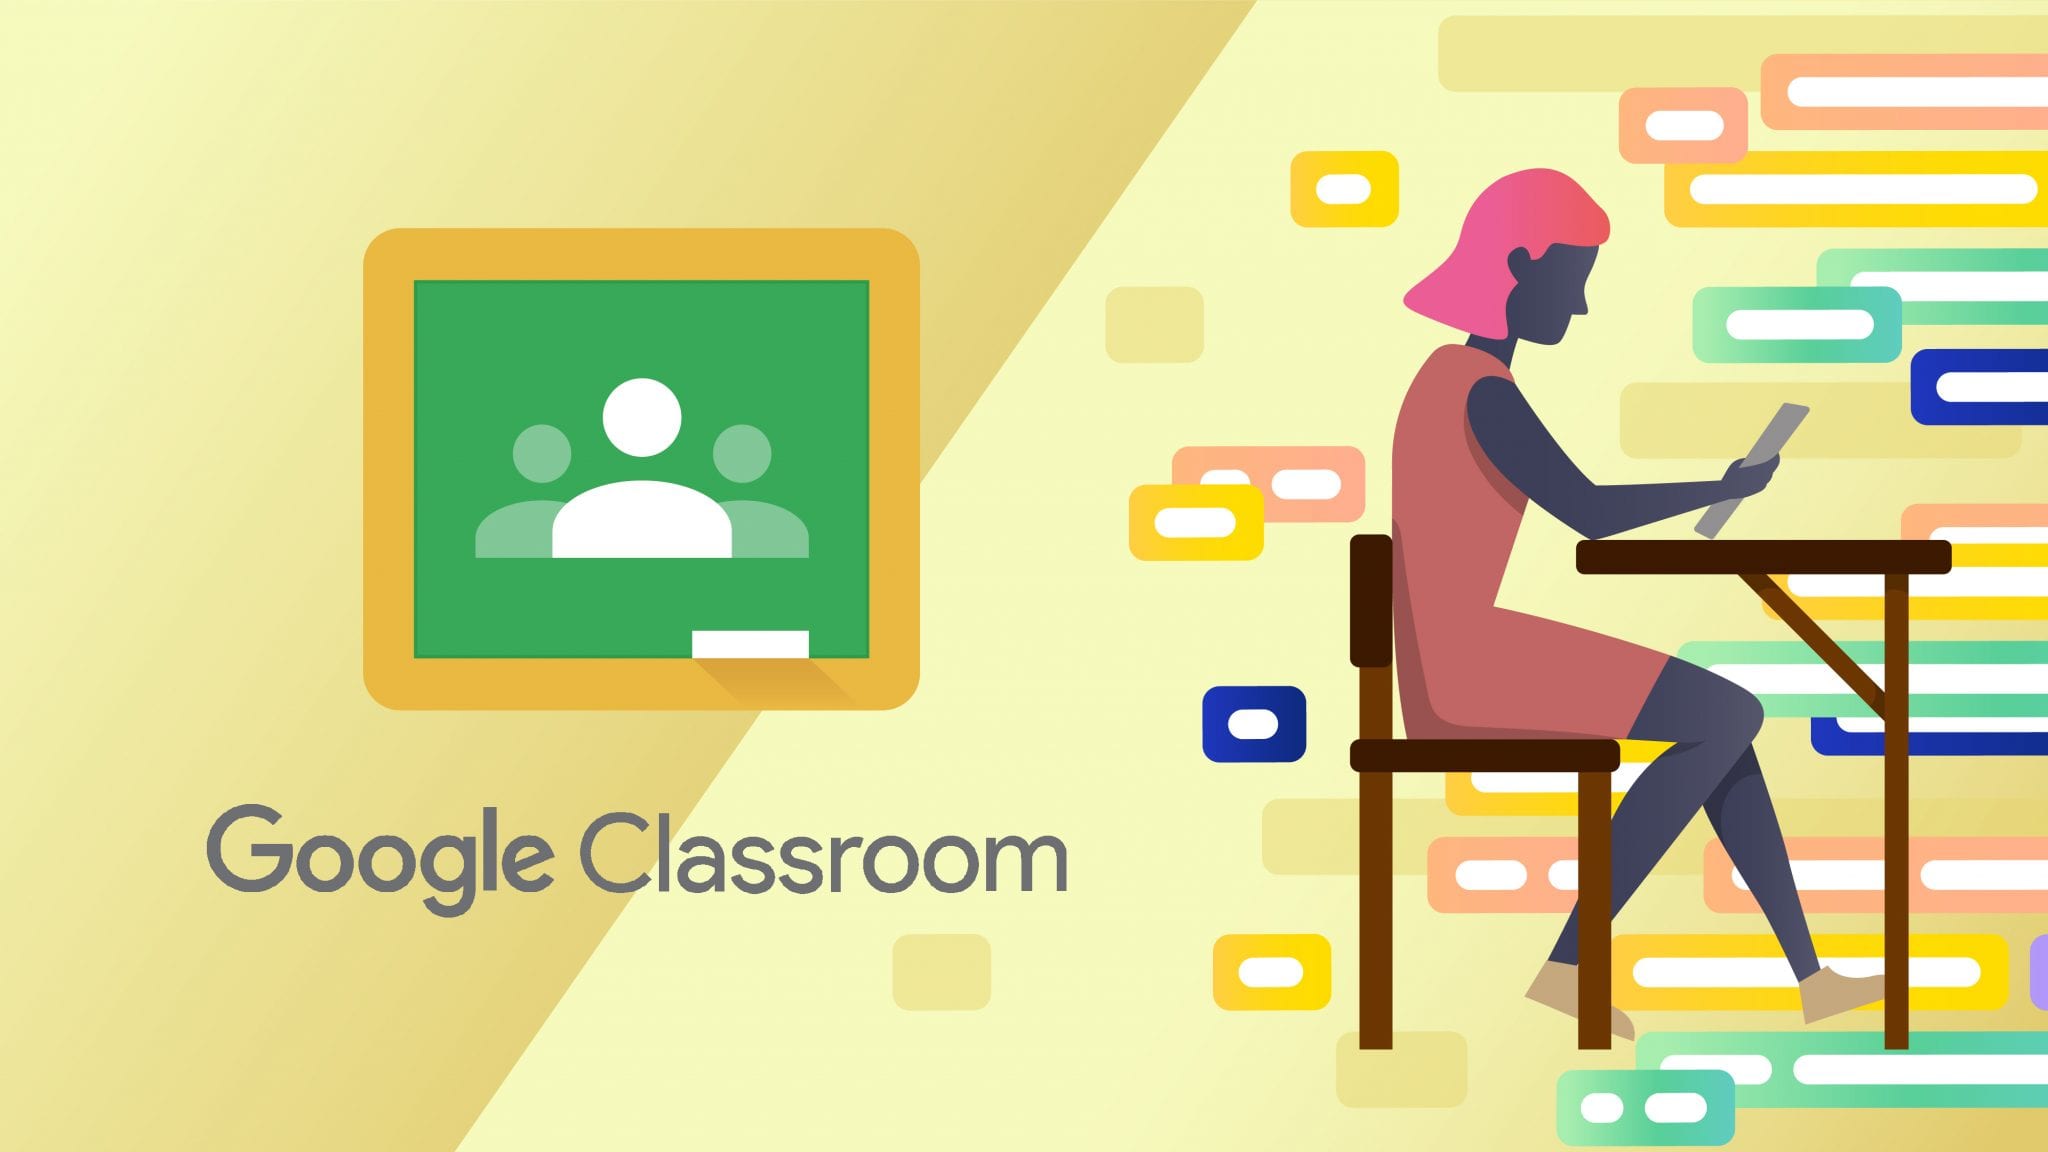 How To Make A Video On Google Classroom Rev